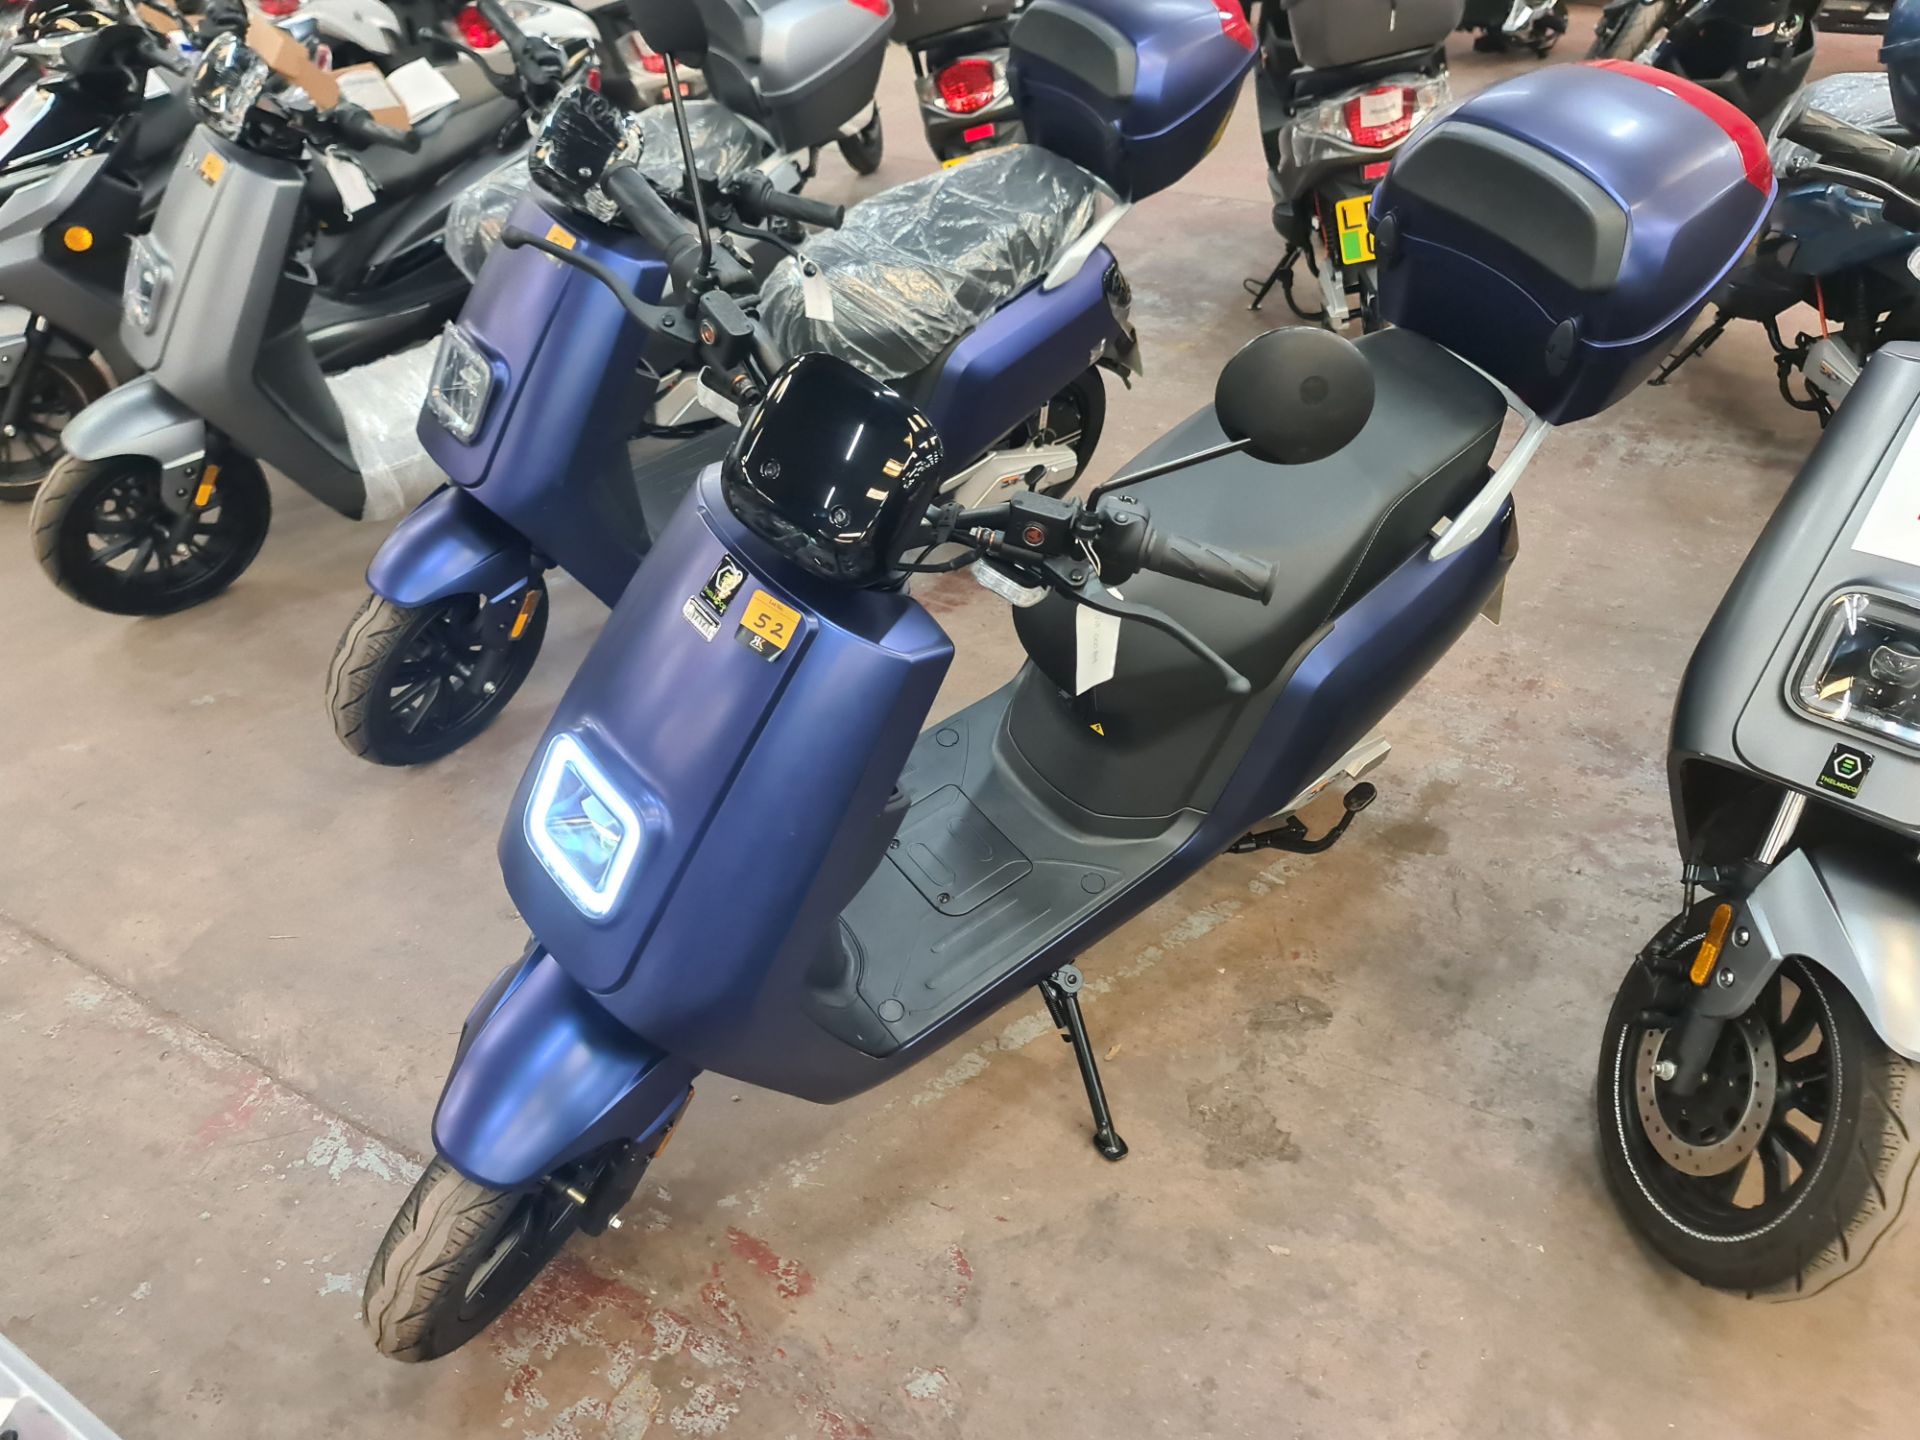 Senda 3000 dual battery electric moped, colour: blue, 50cc equivalent, 30mph top speed, 90 mile rang